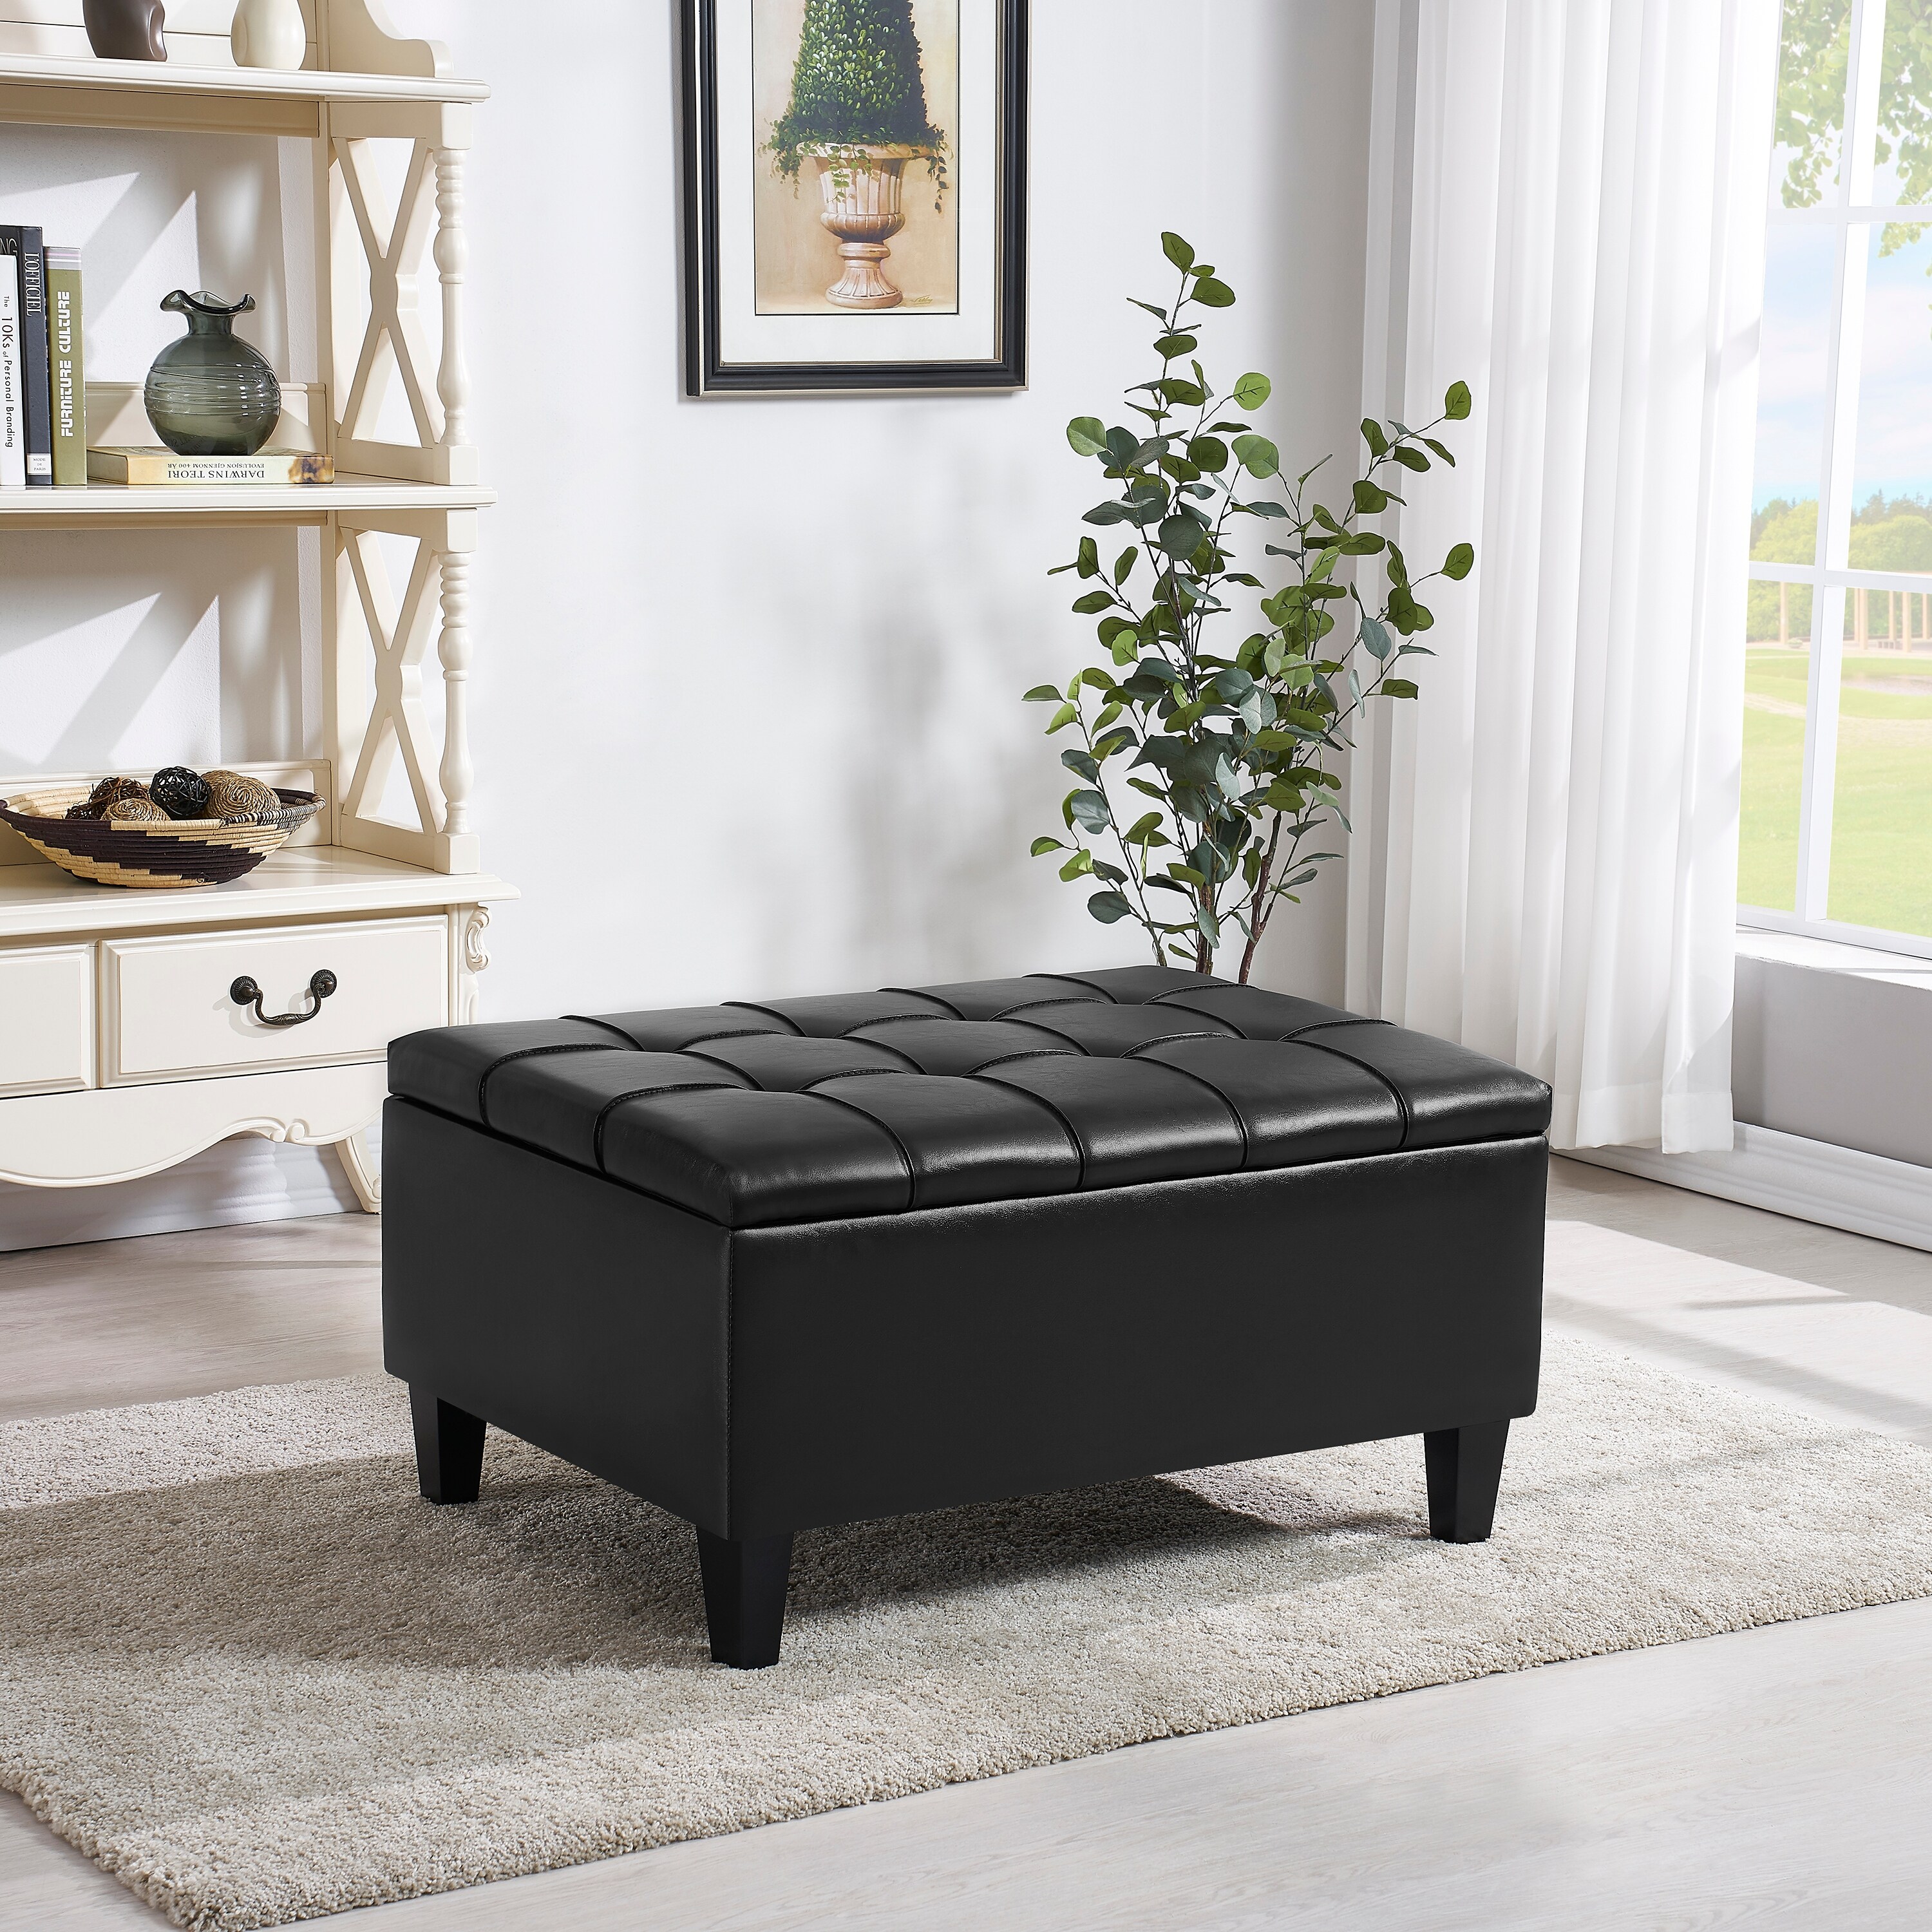 https://ak1.ostkcdn.com/images/products/is/images/direct/e67fd5280a4ba443c1f12778cbed7af0c7a45d9c/Multipurpose-Upholstery-Storage-Foot-Rest-Sofa-Stool%2C-Black.jpg